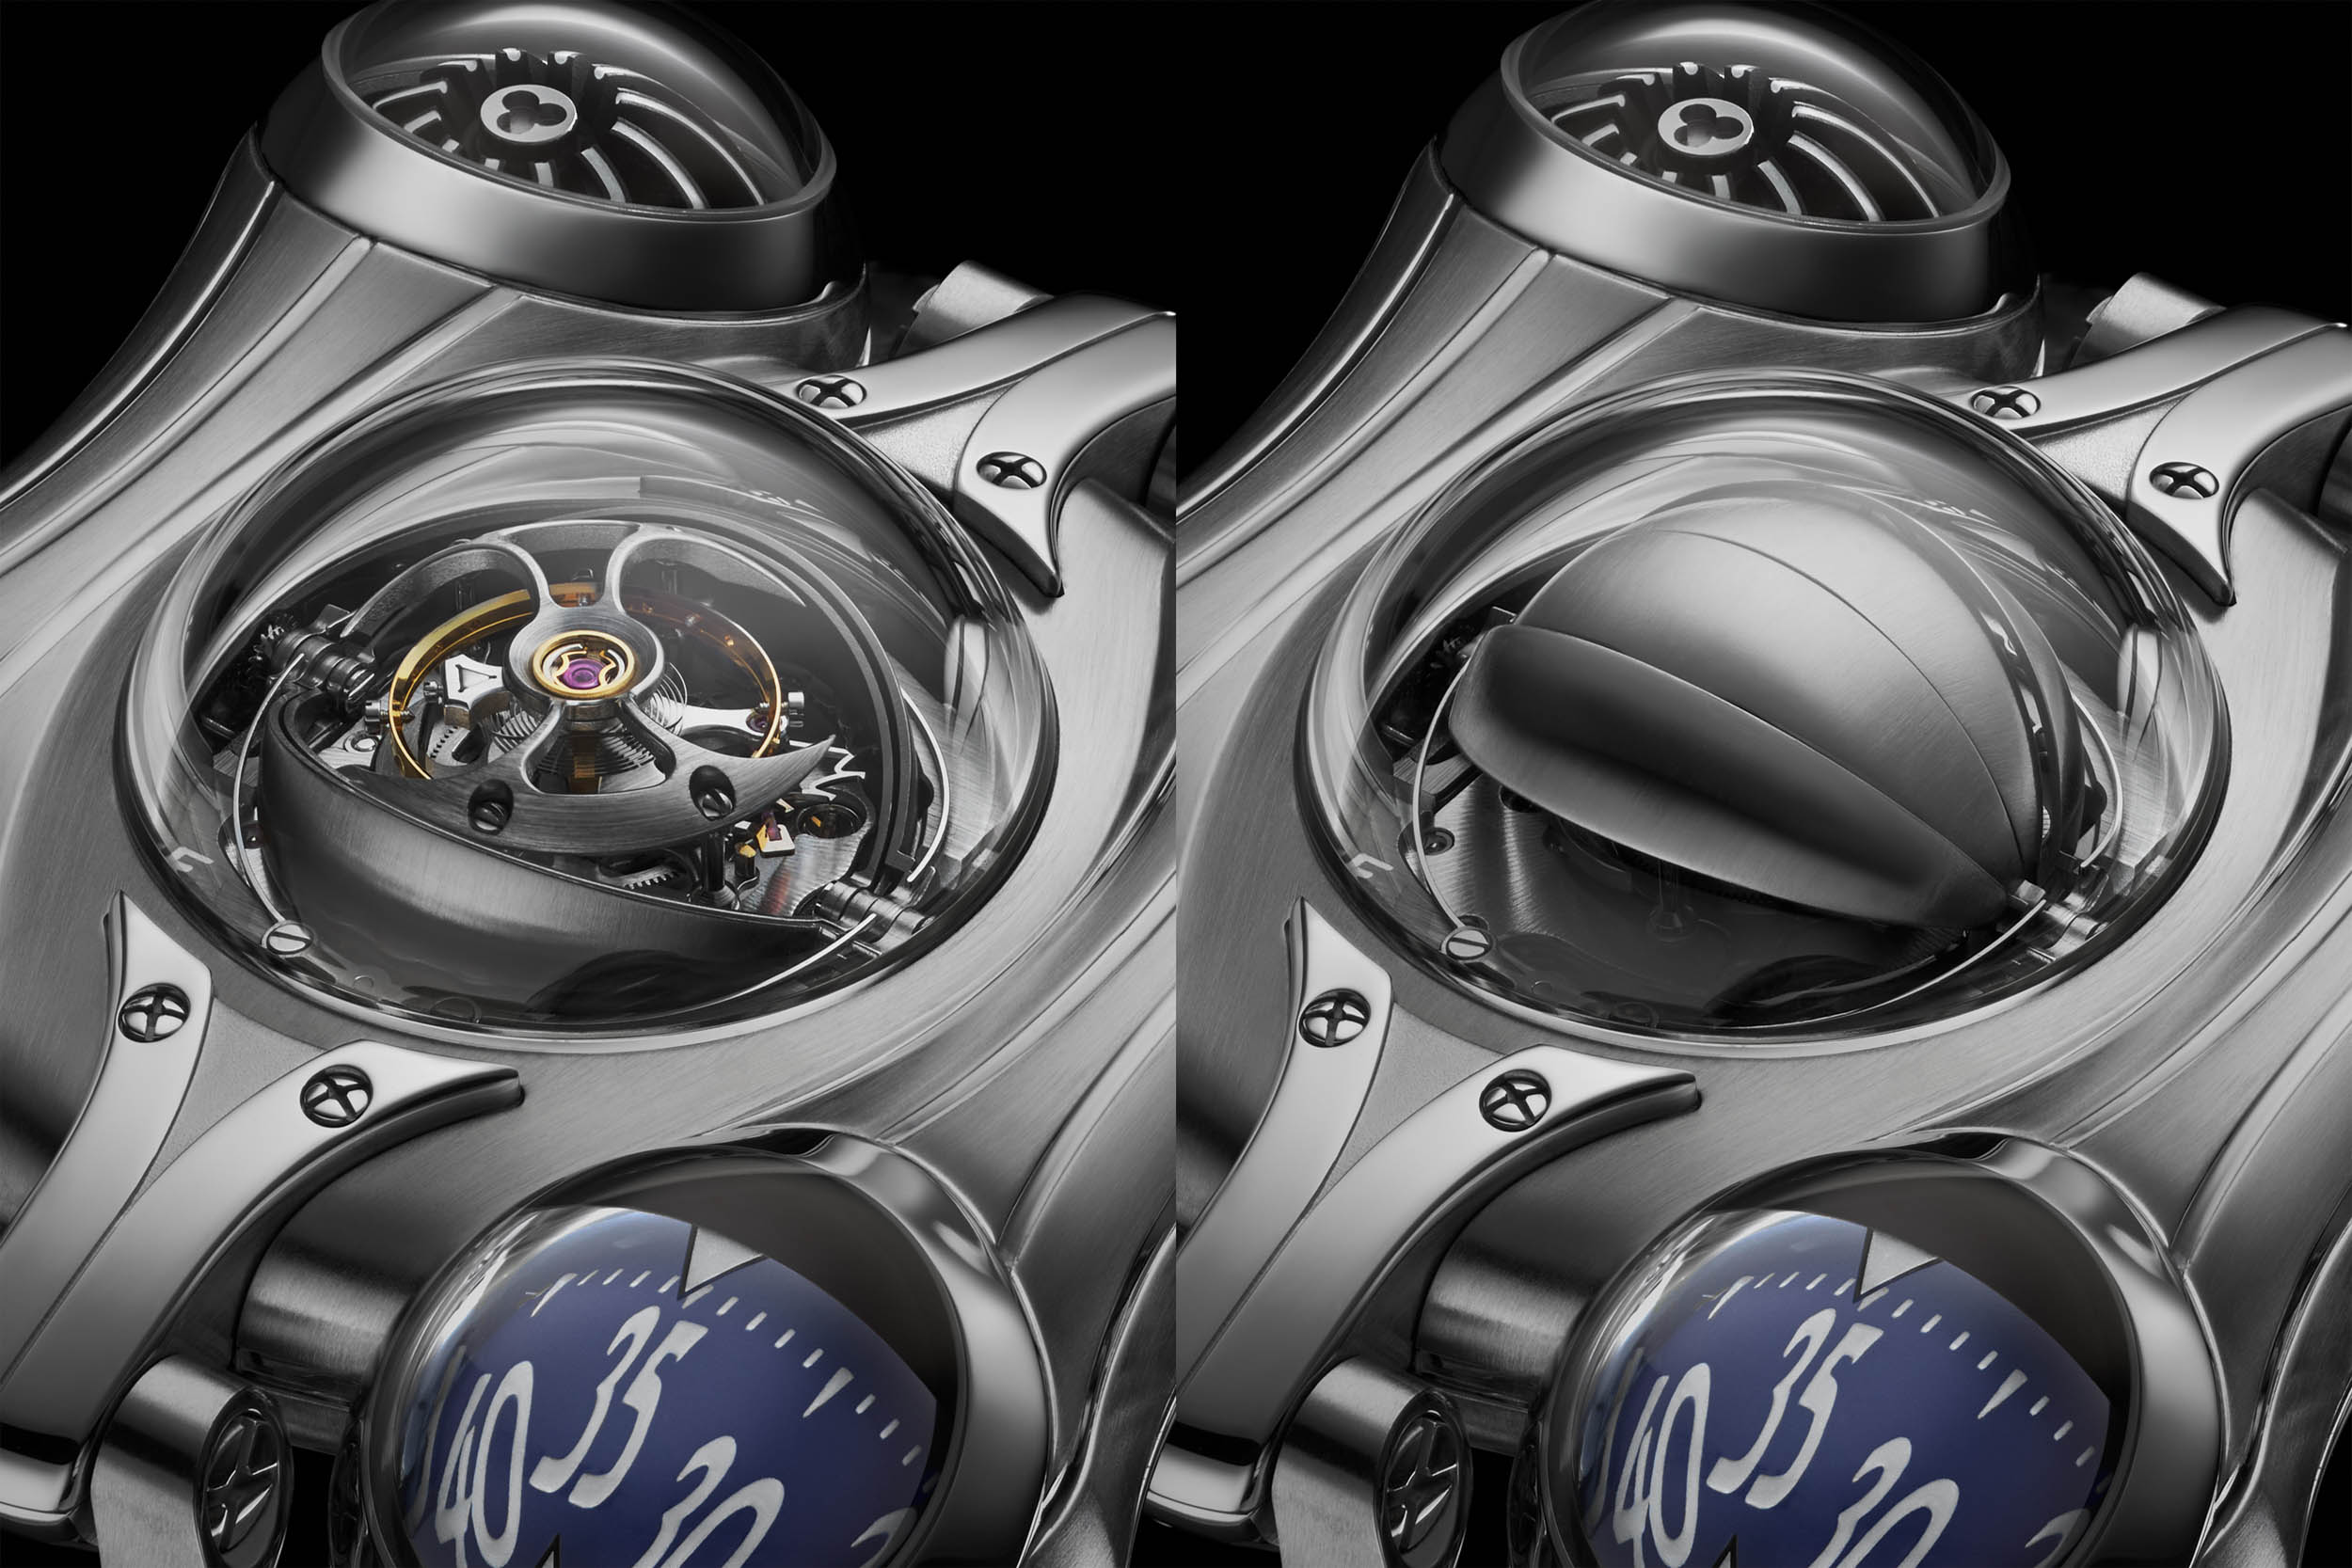 60-SECOND FLYING TOURBILLON The choice of such a sophisticated regulator was dictated by the restricted space under the crystal dome, which could not accommodate the upper supporting bridge of a standard balance wheel.